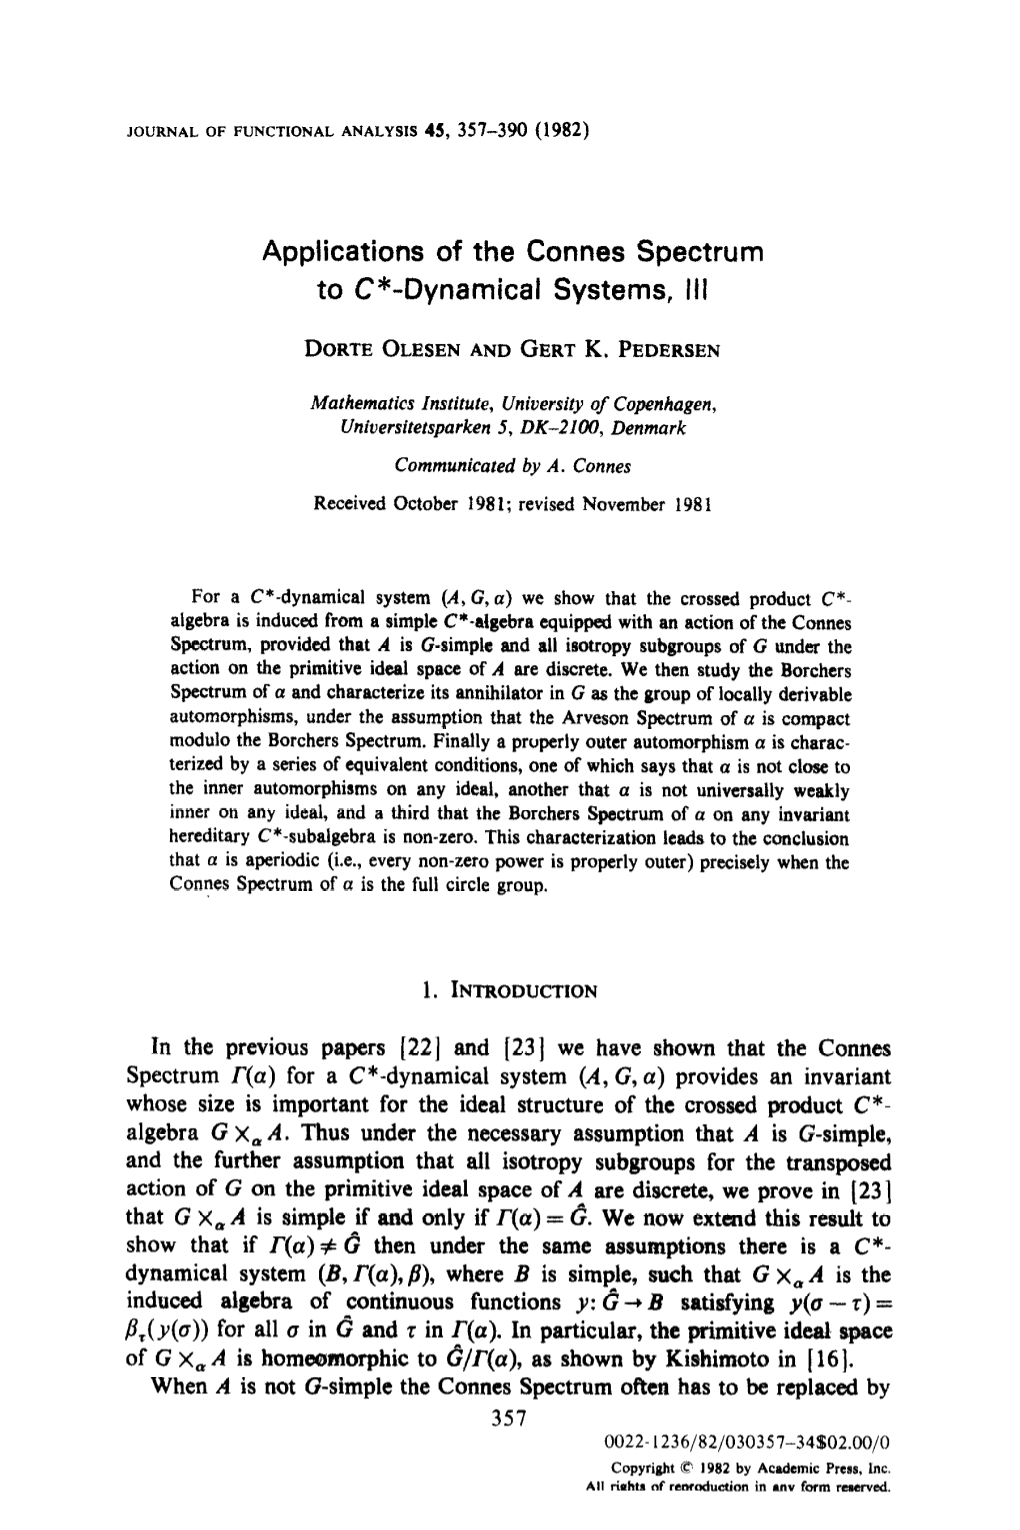 Applications of the Connes Spectrum to C*-Dynamical Systems, III